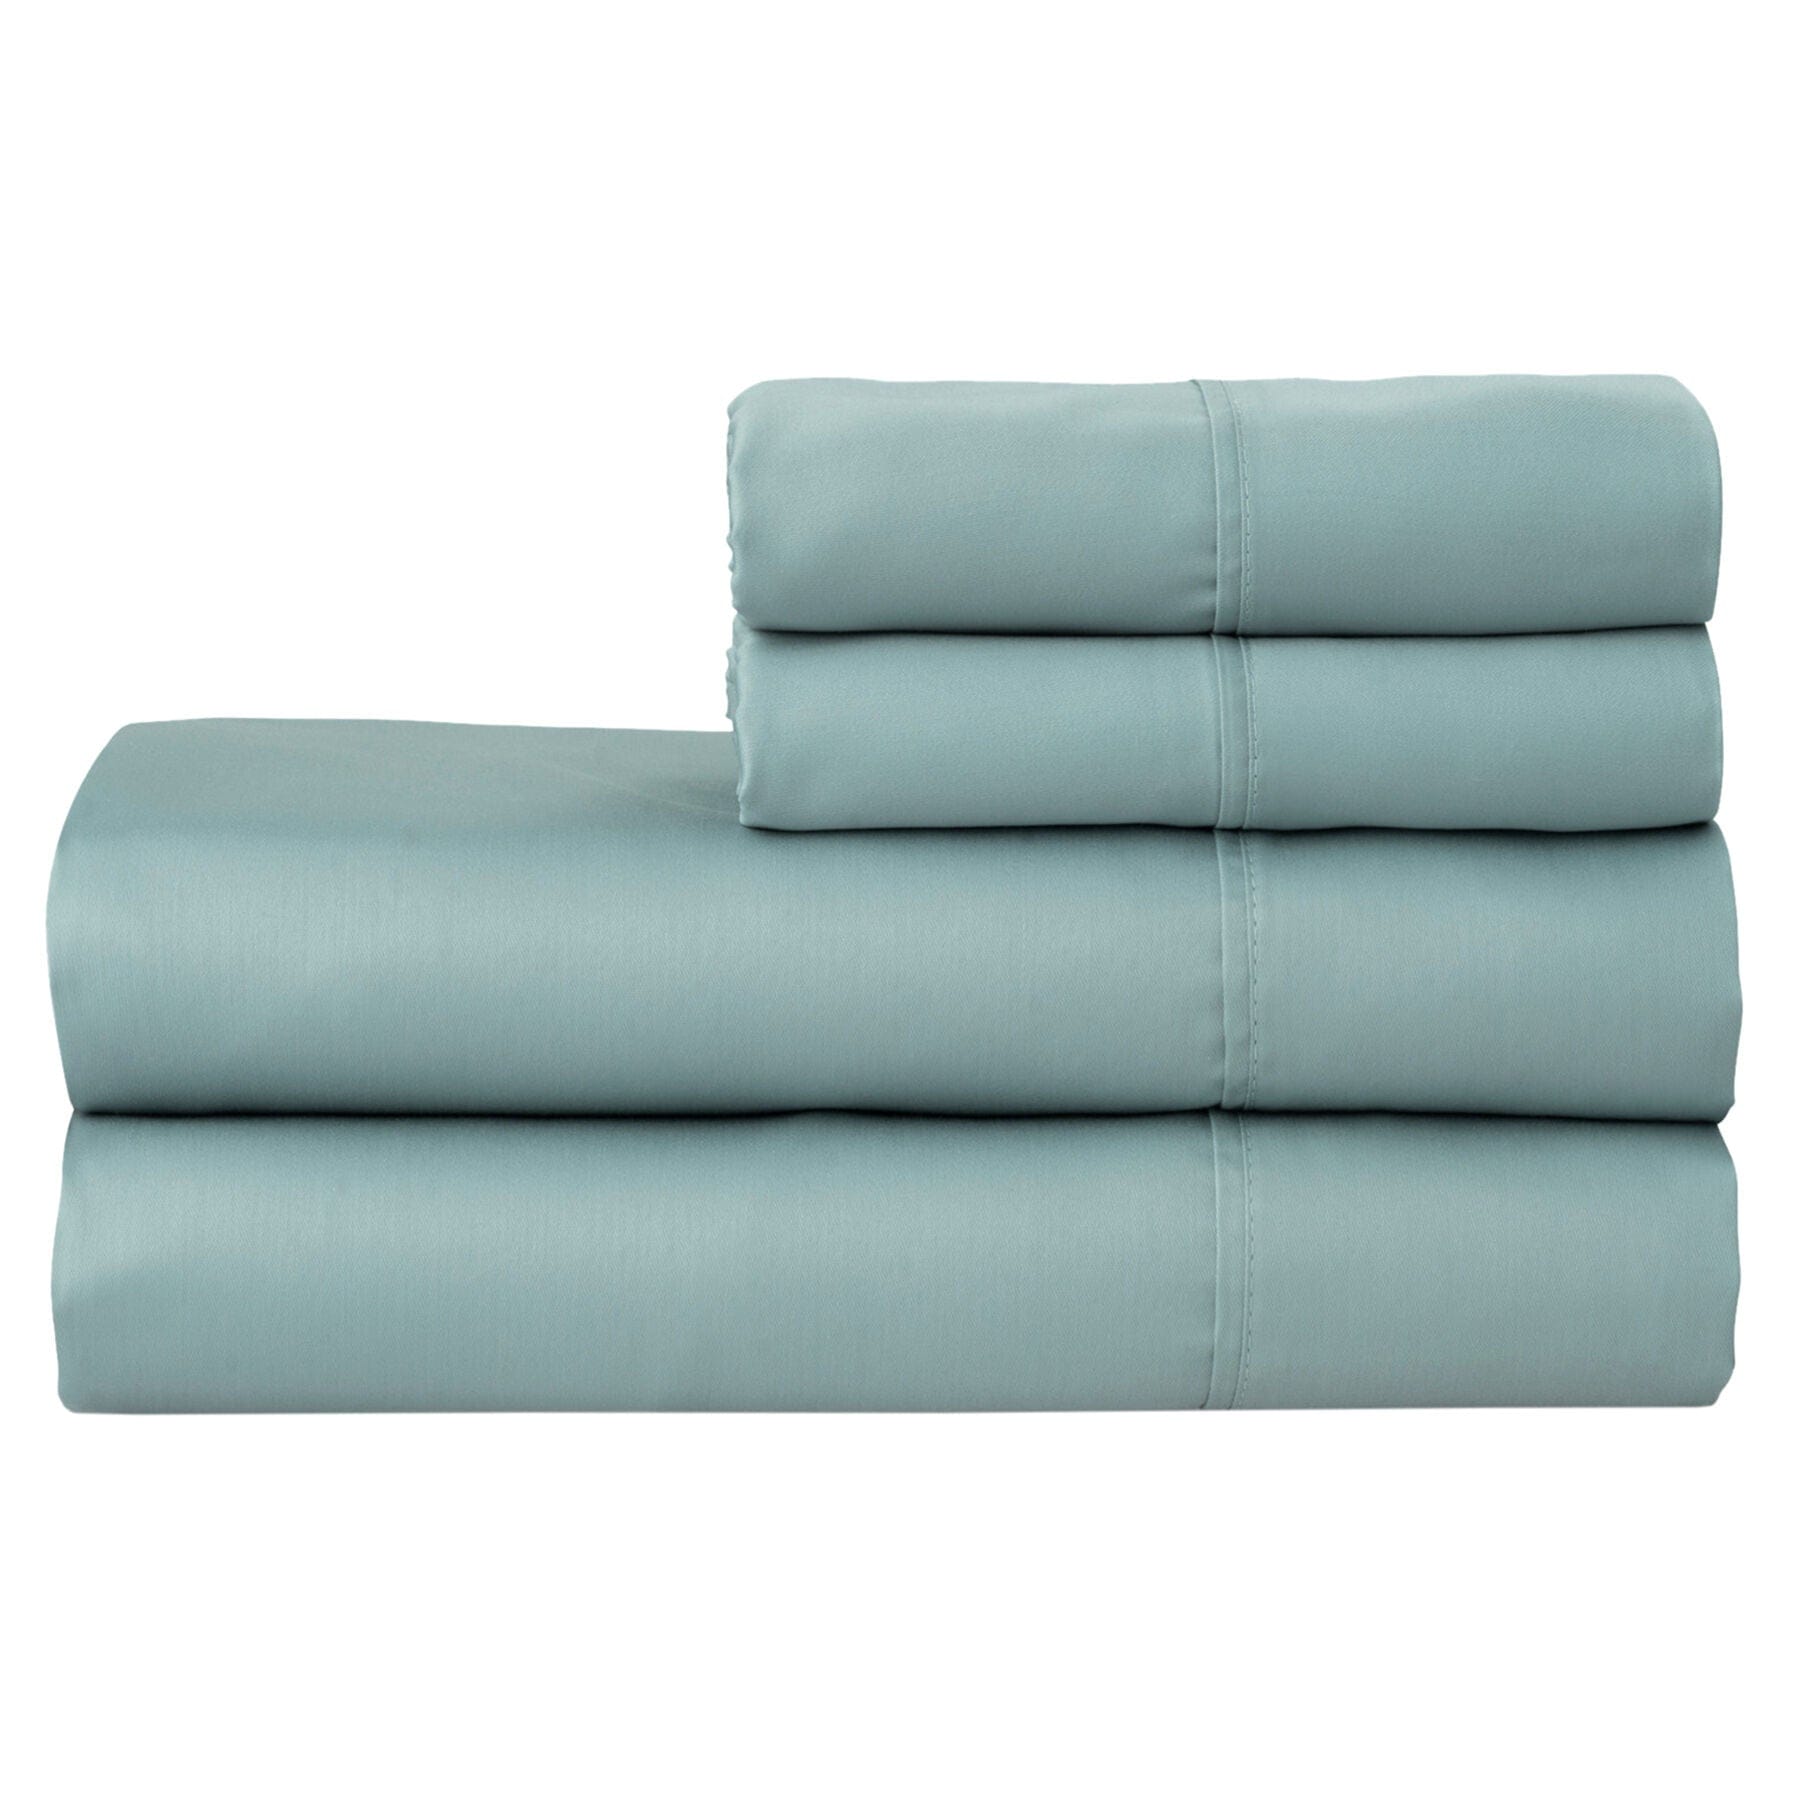 4-Piece Cloud Blue 500 Thread Count Blended Sheet Set, King - nybusiness